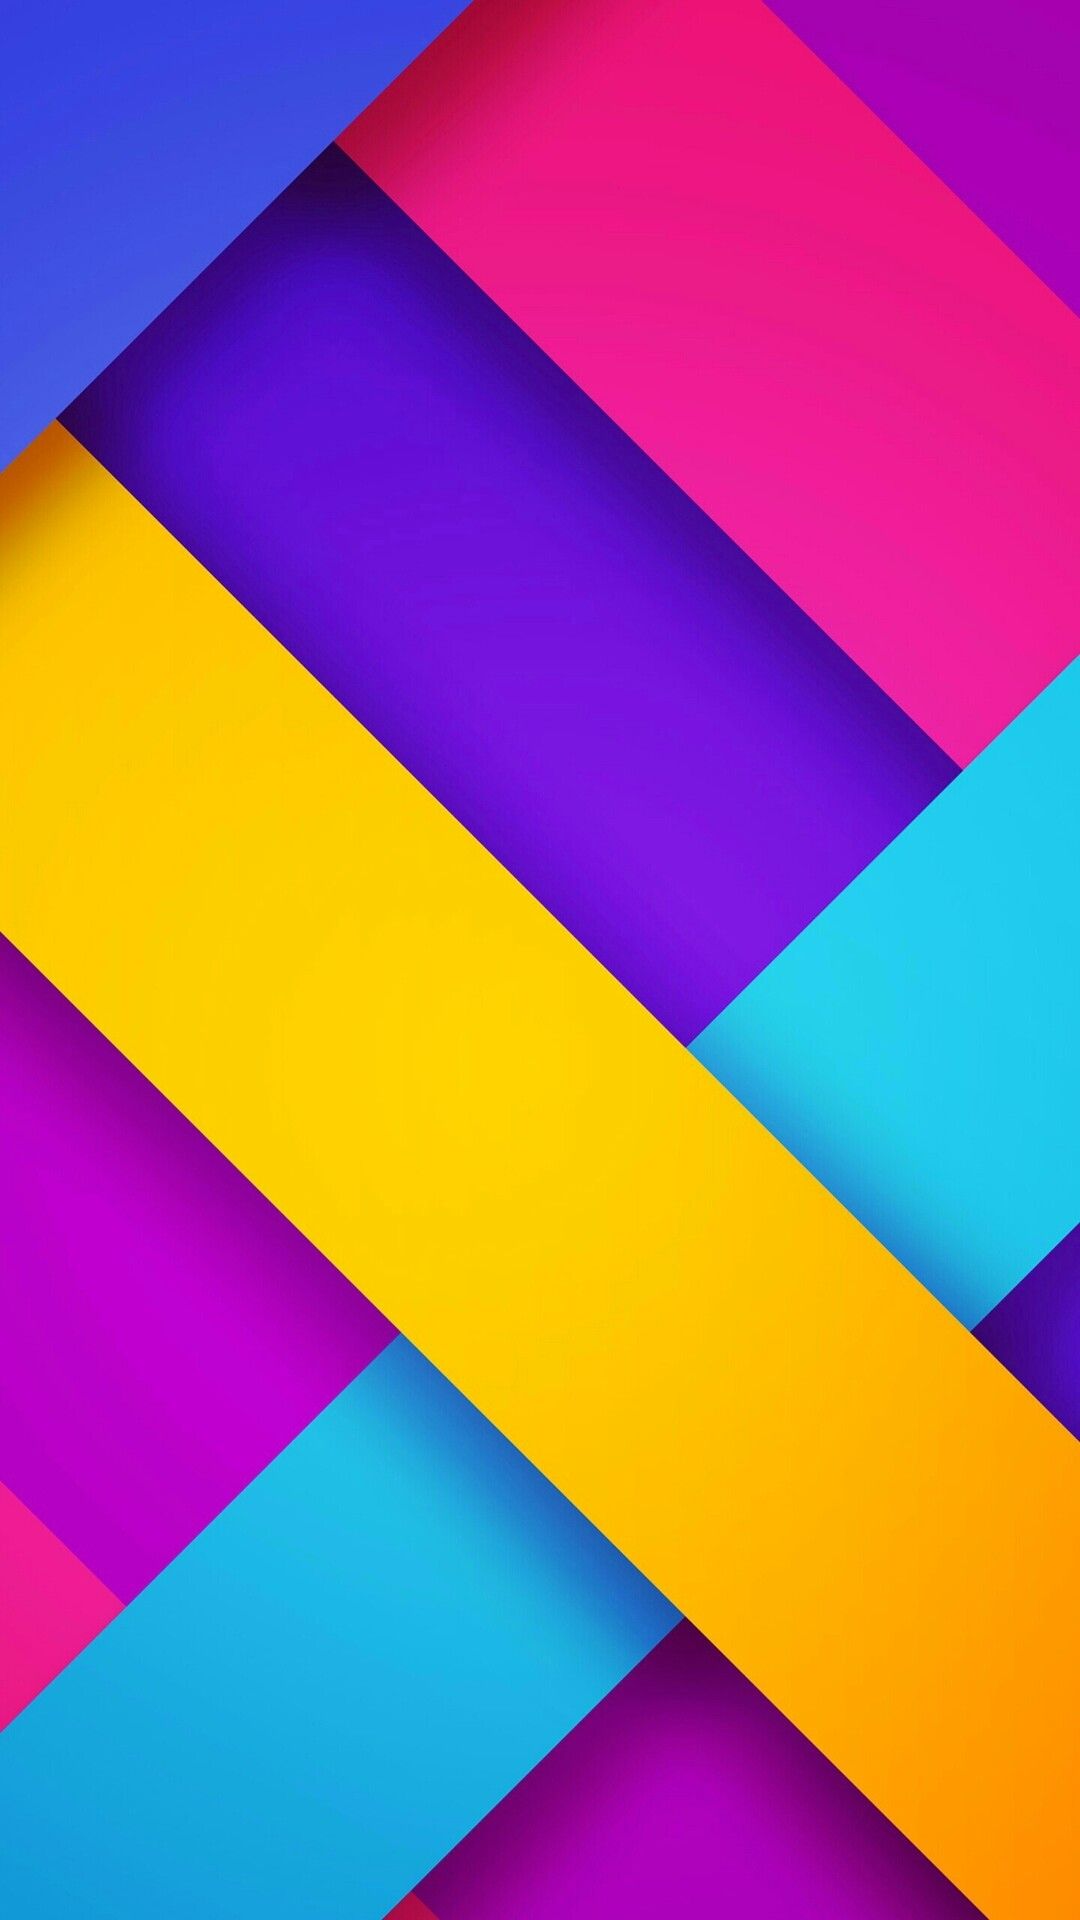 Colorful Phone Wallpaper, HD Colorful Phone Background on WallpaperBat